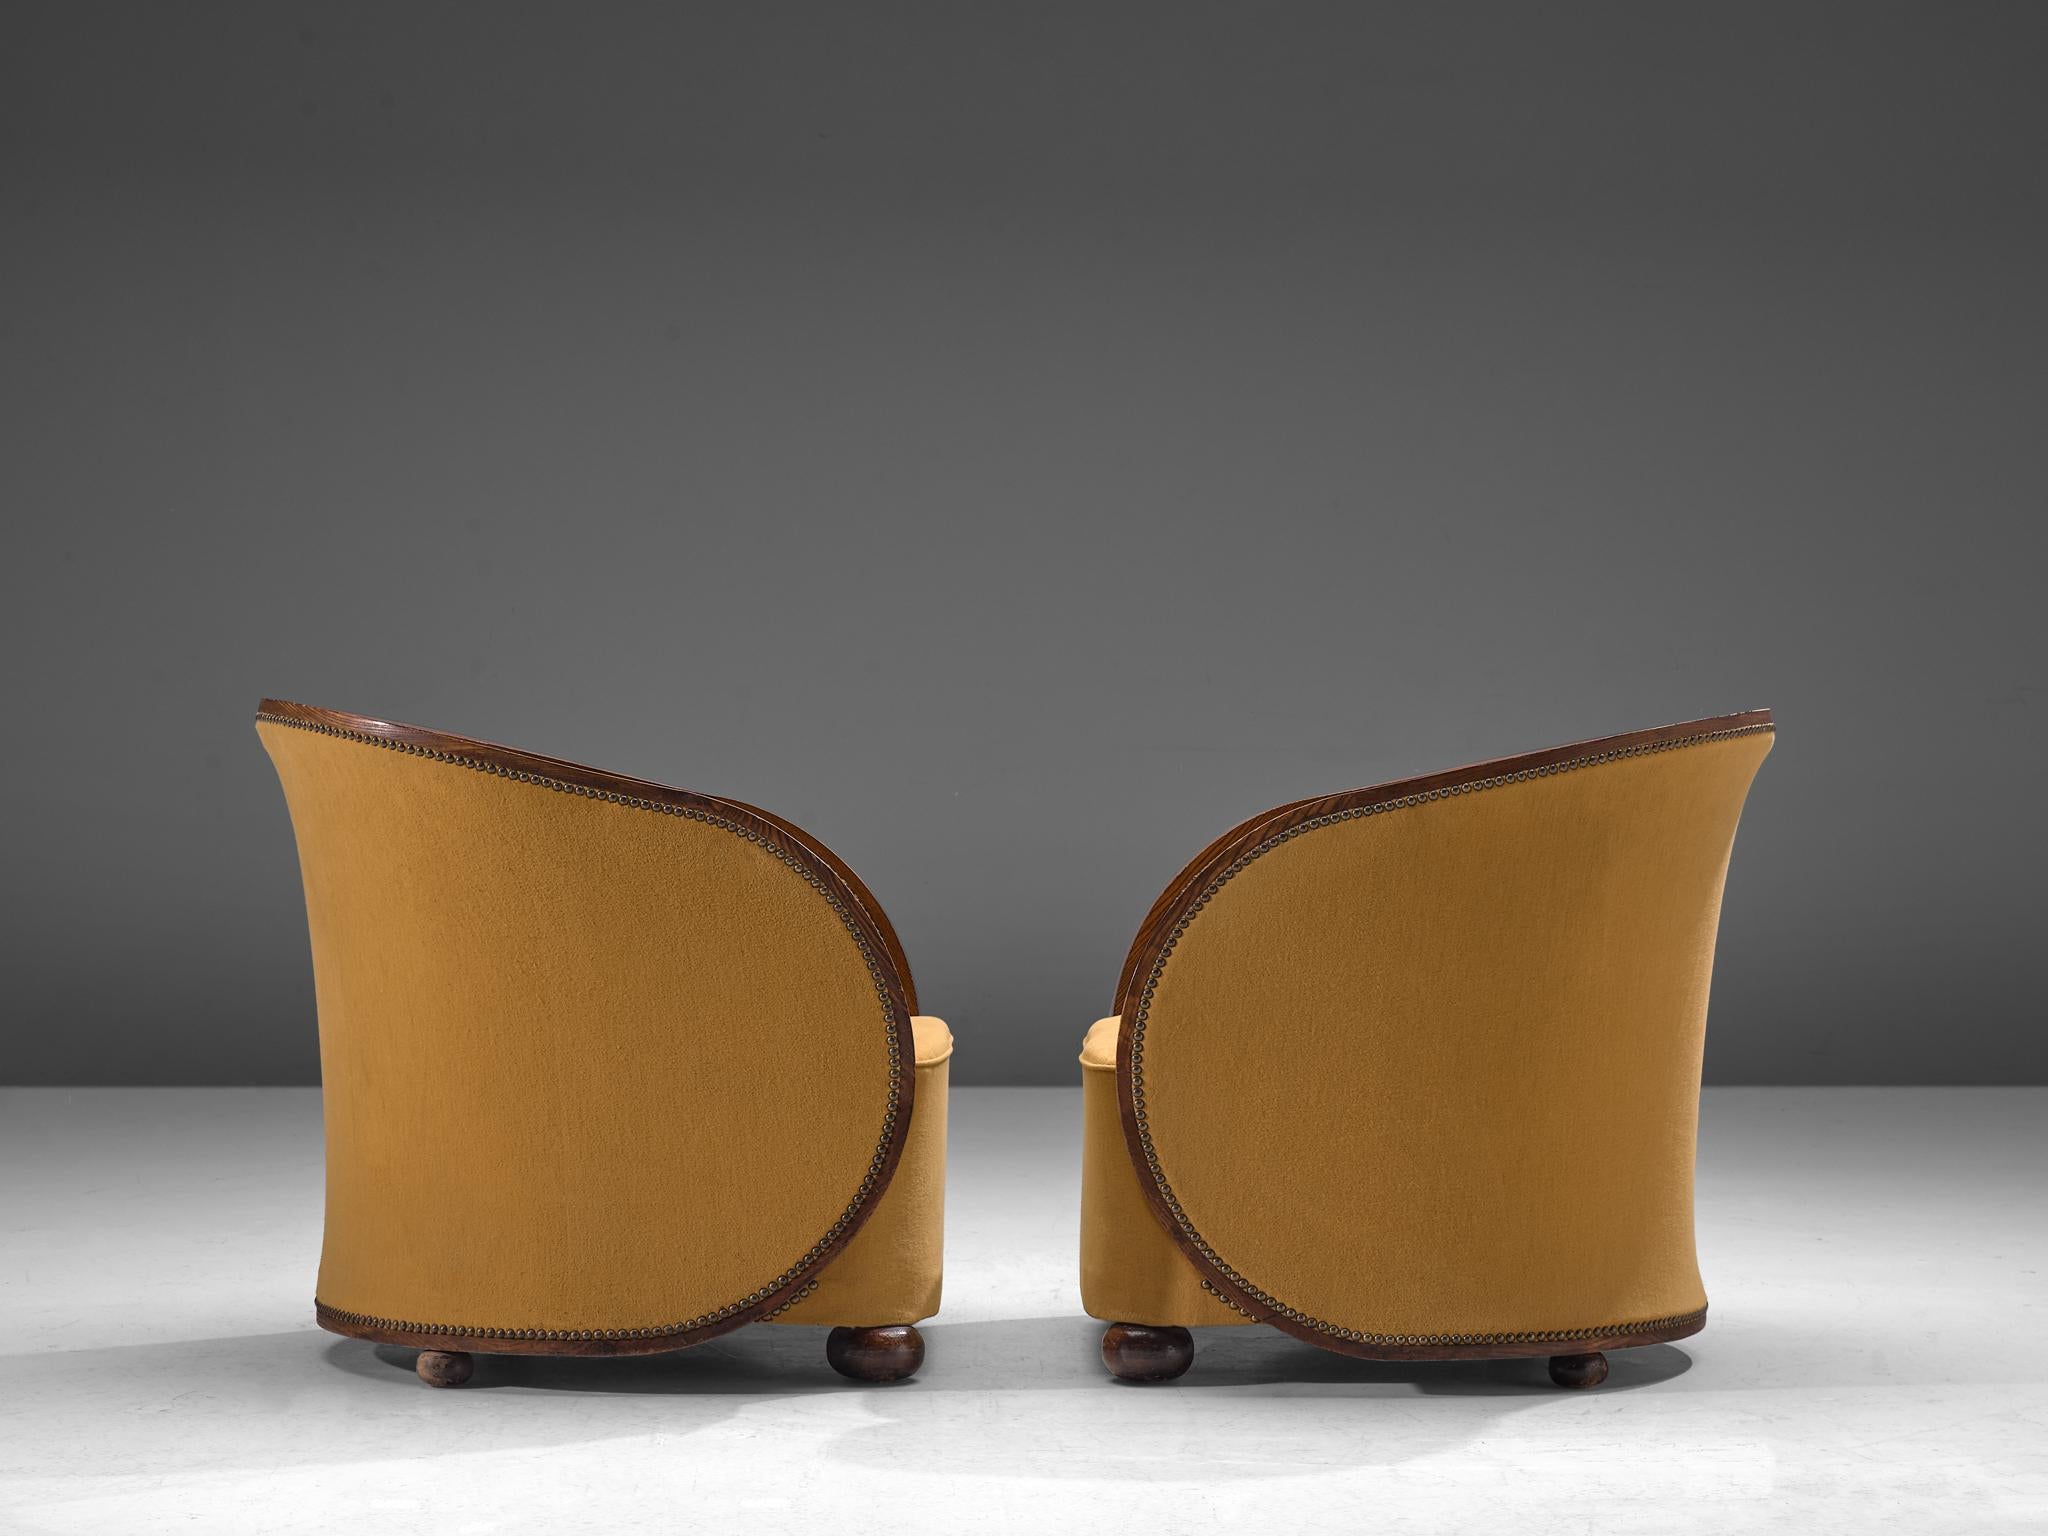 Fabric Pair of French Art Deco Lounge Chairs in Yellow Upholstery